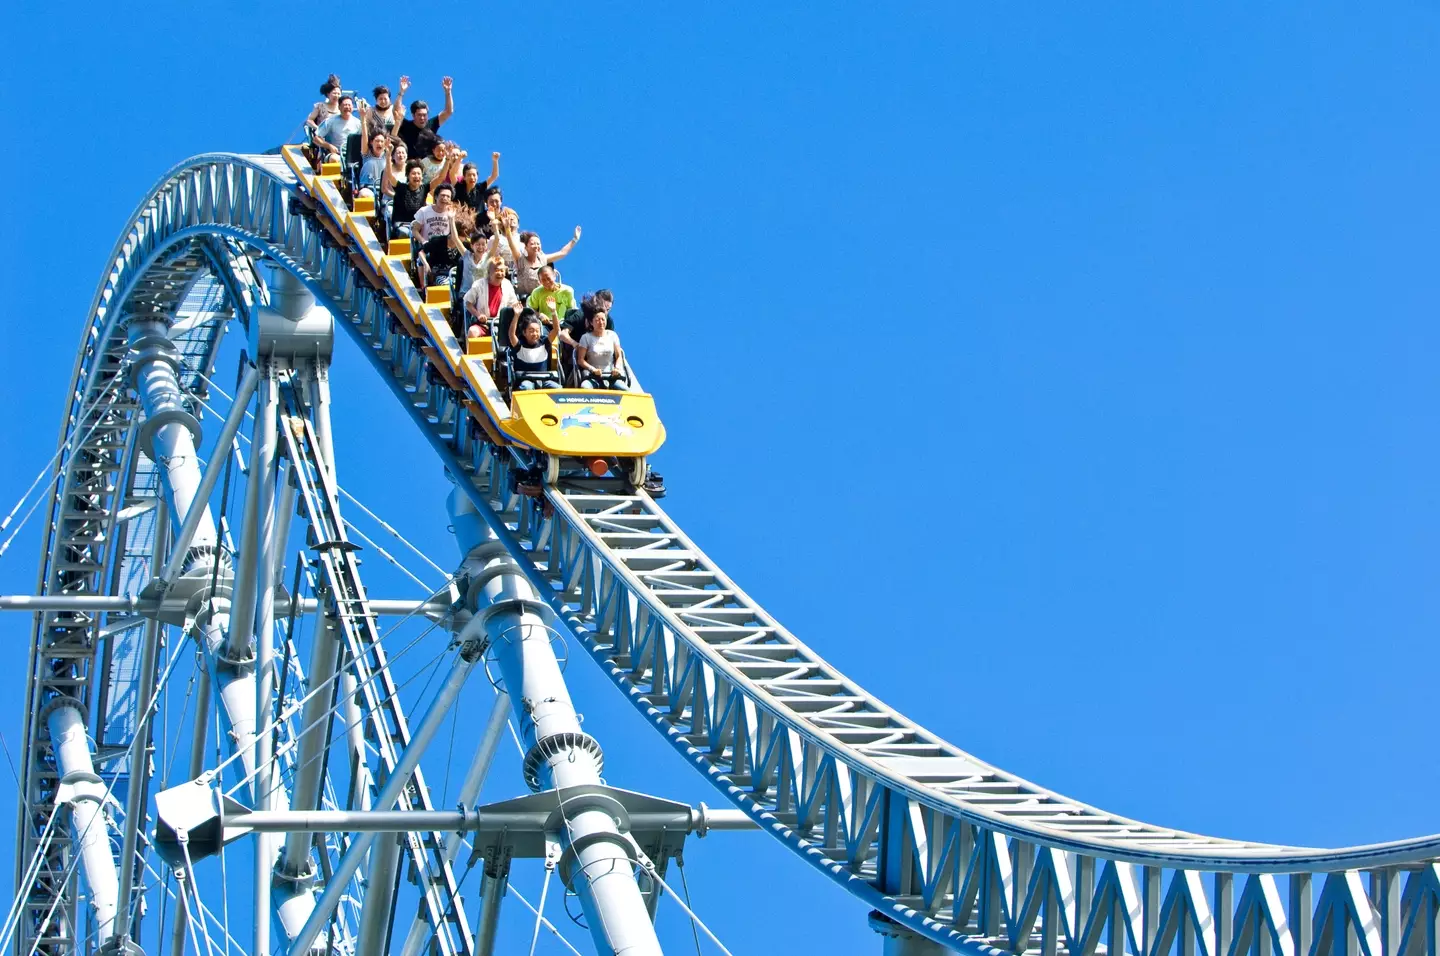 Roller coasters may just be the answer to treat kidney stones!